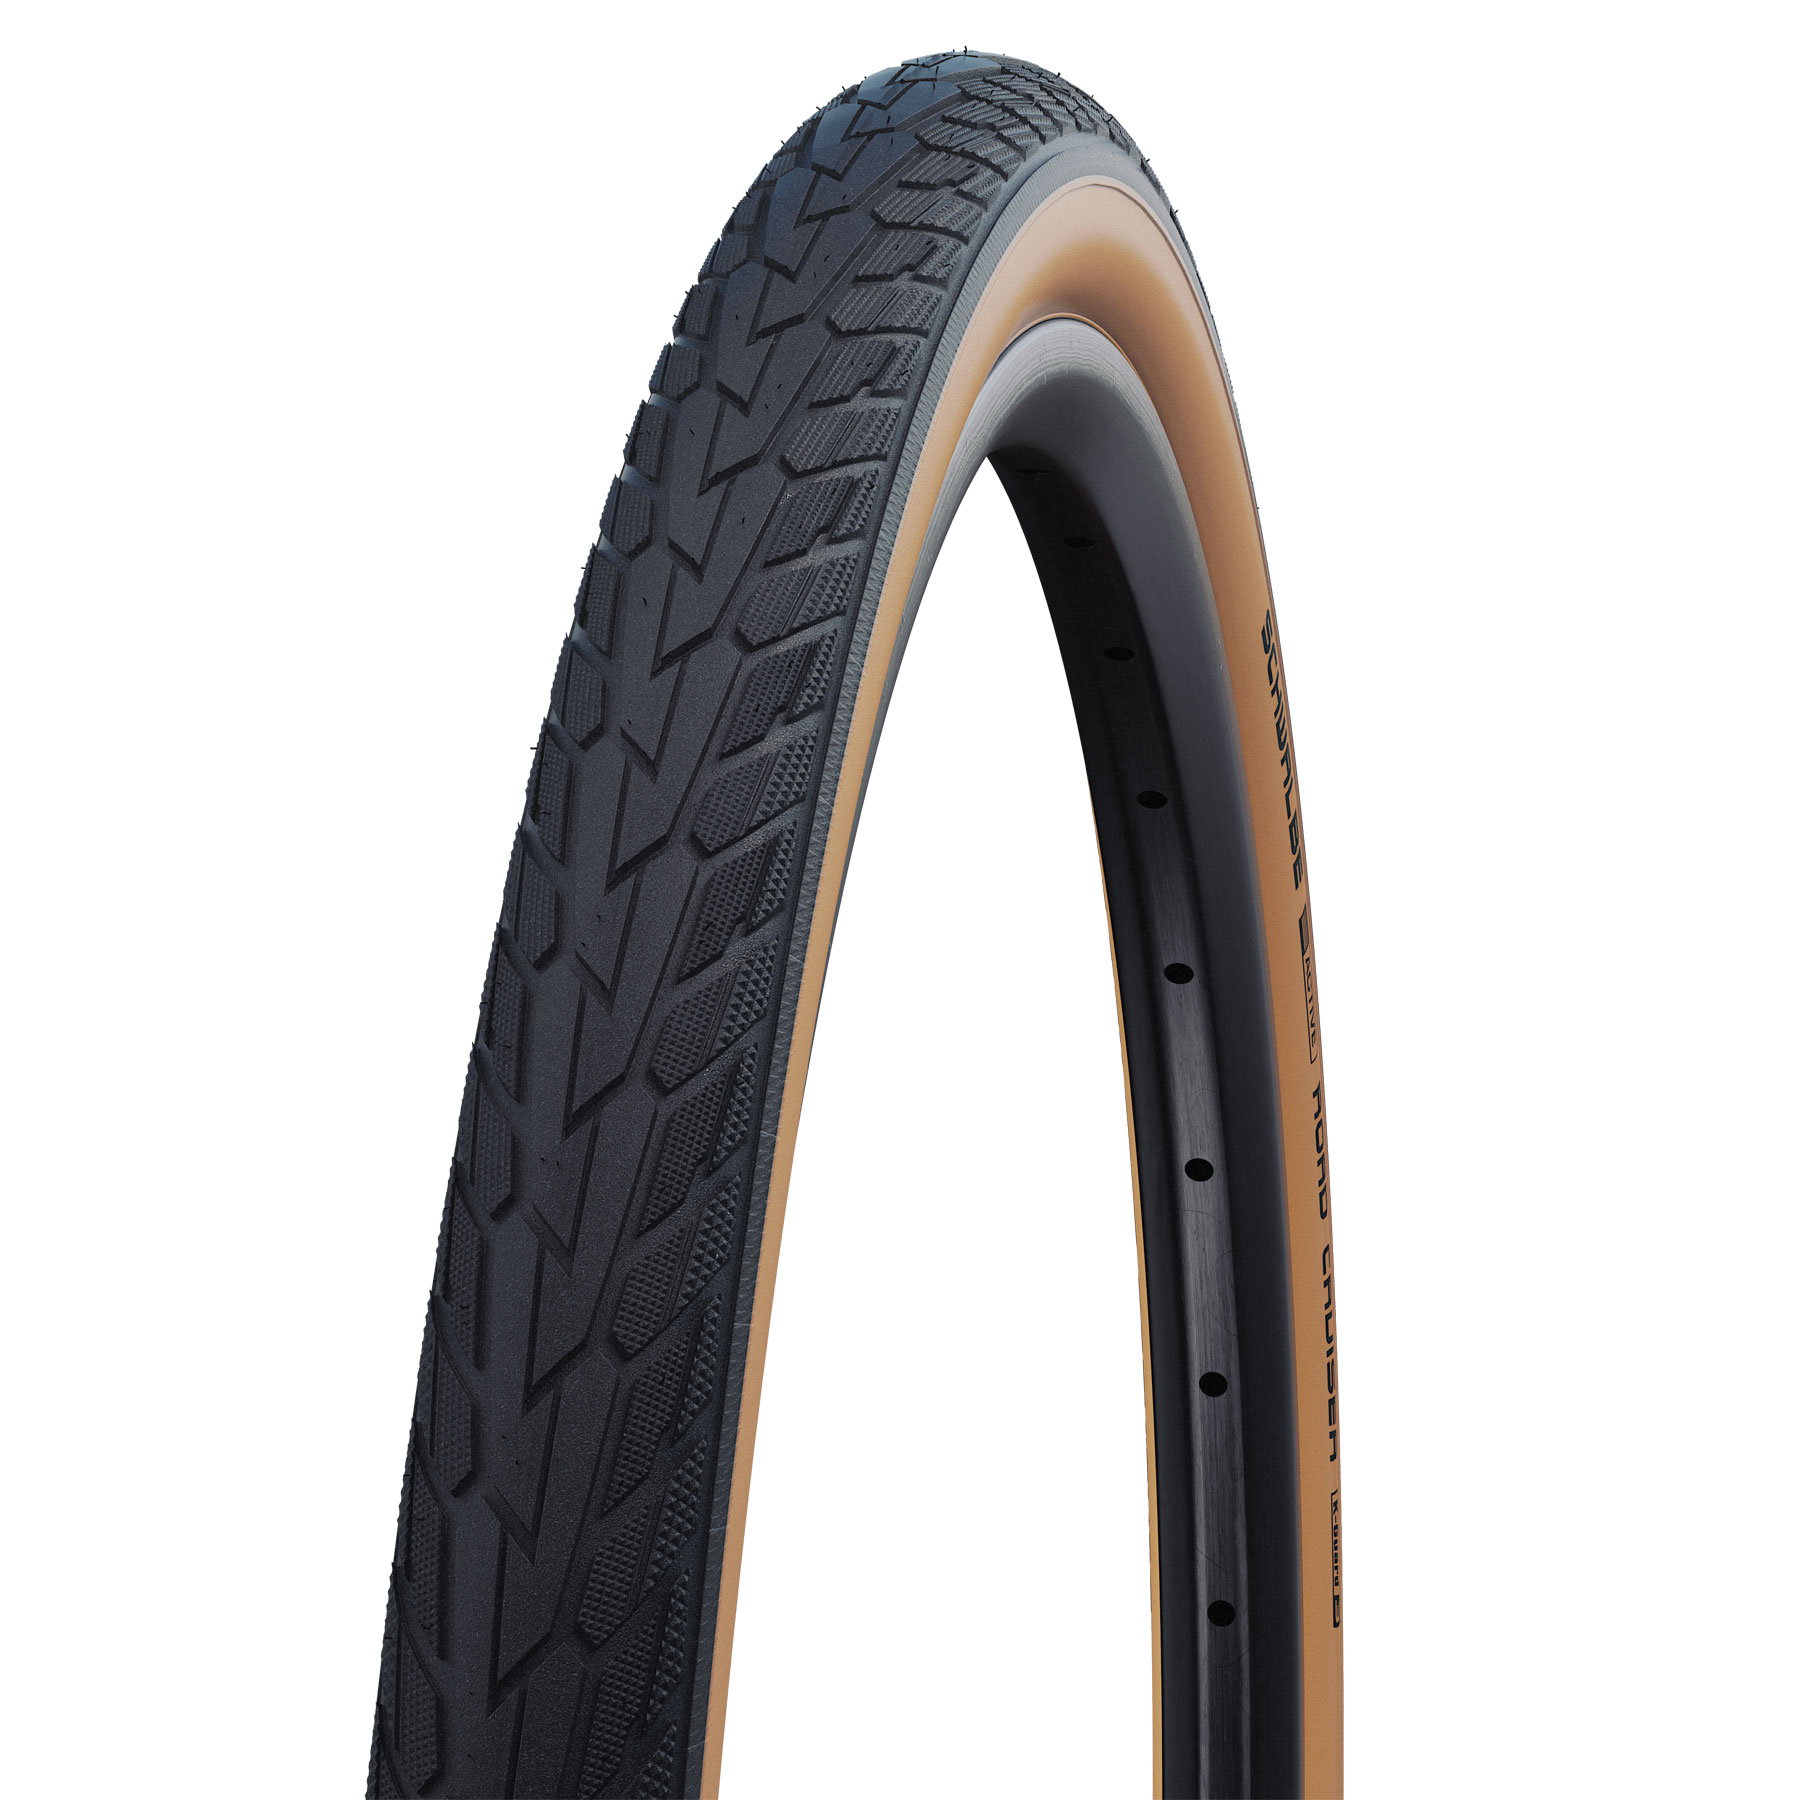 Productfoto van Schwalbe Road Cruiser Active Wired Tire - 26x1.75 Inches - Gumwall